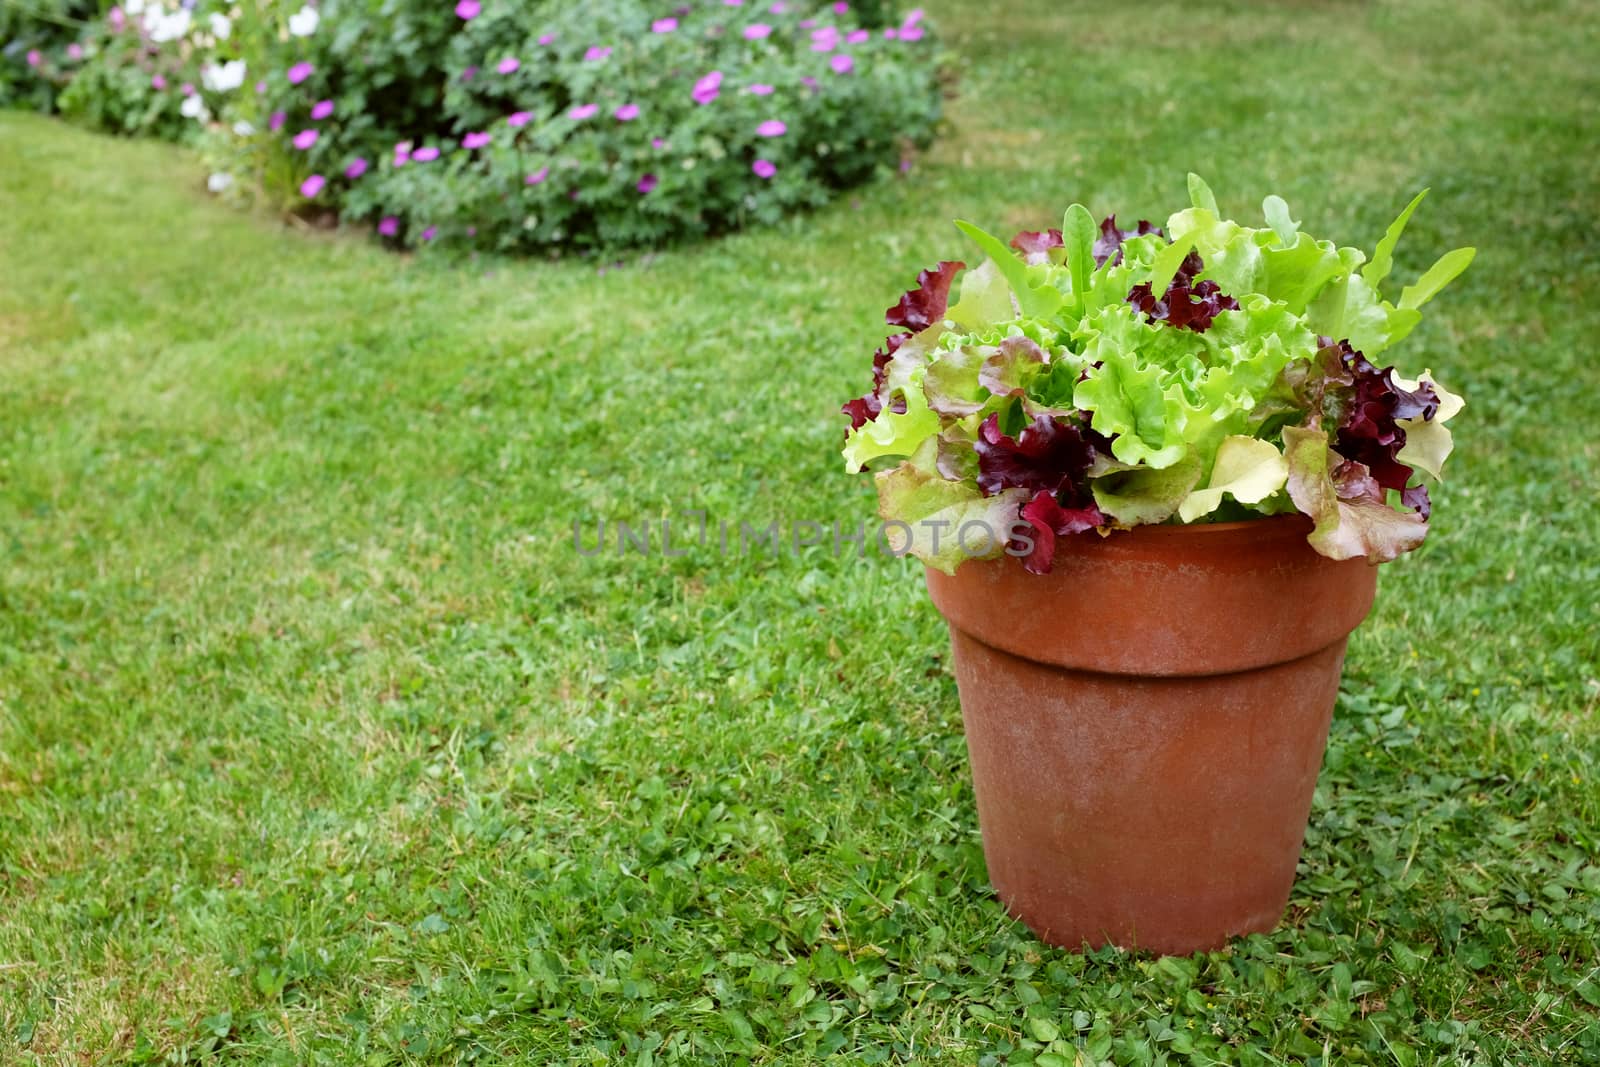 Flower pot of mixed lettuce plants, red and green salad leaves, ready to pick in a pretty garden with copy space